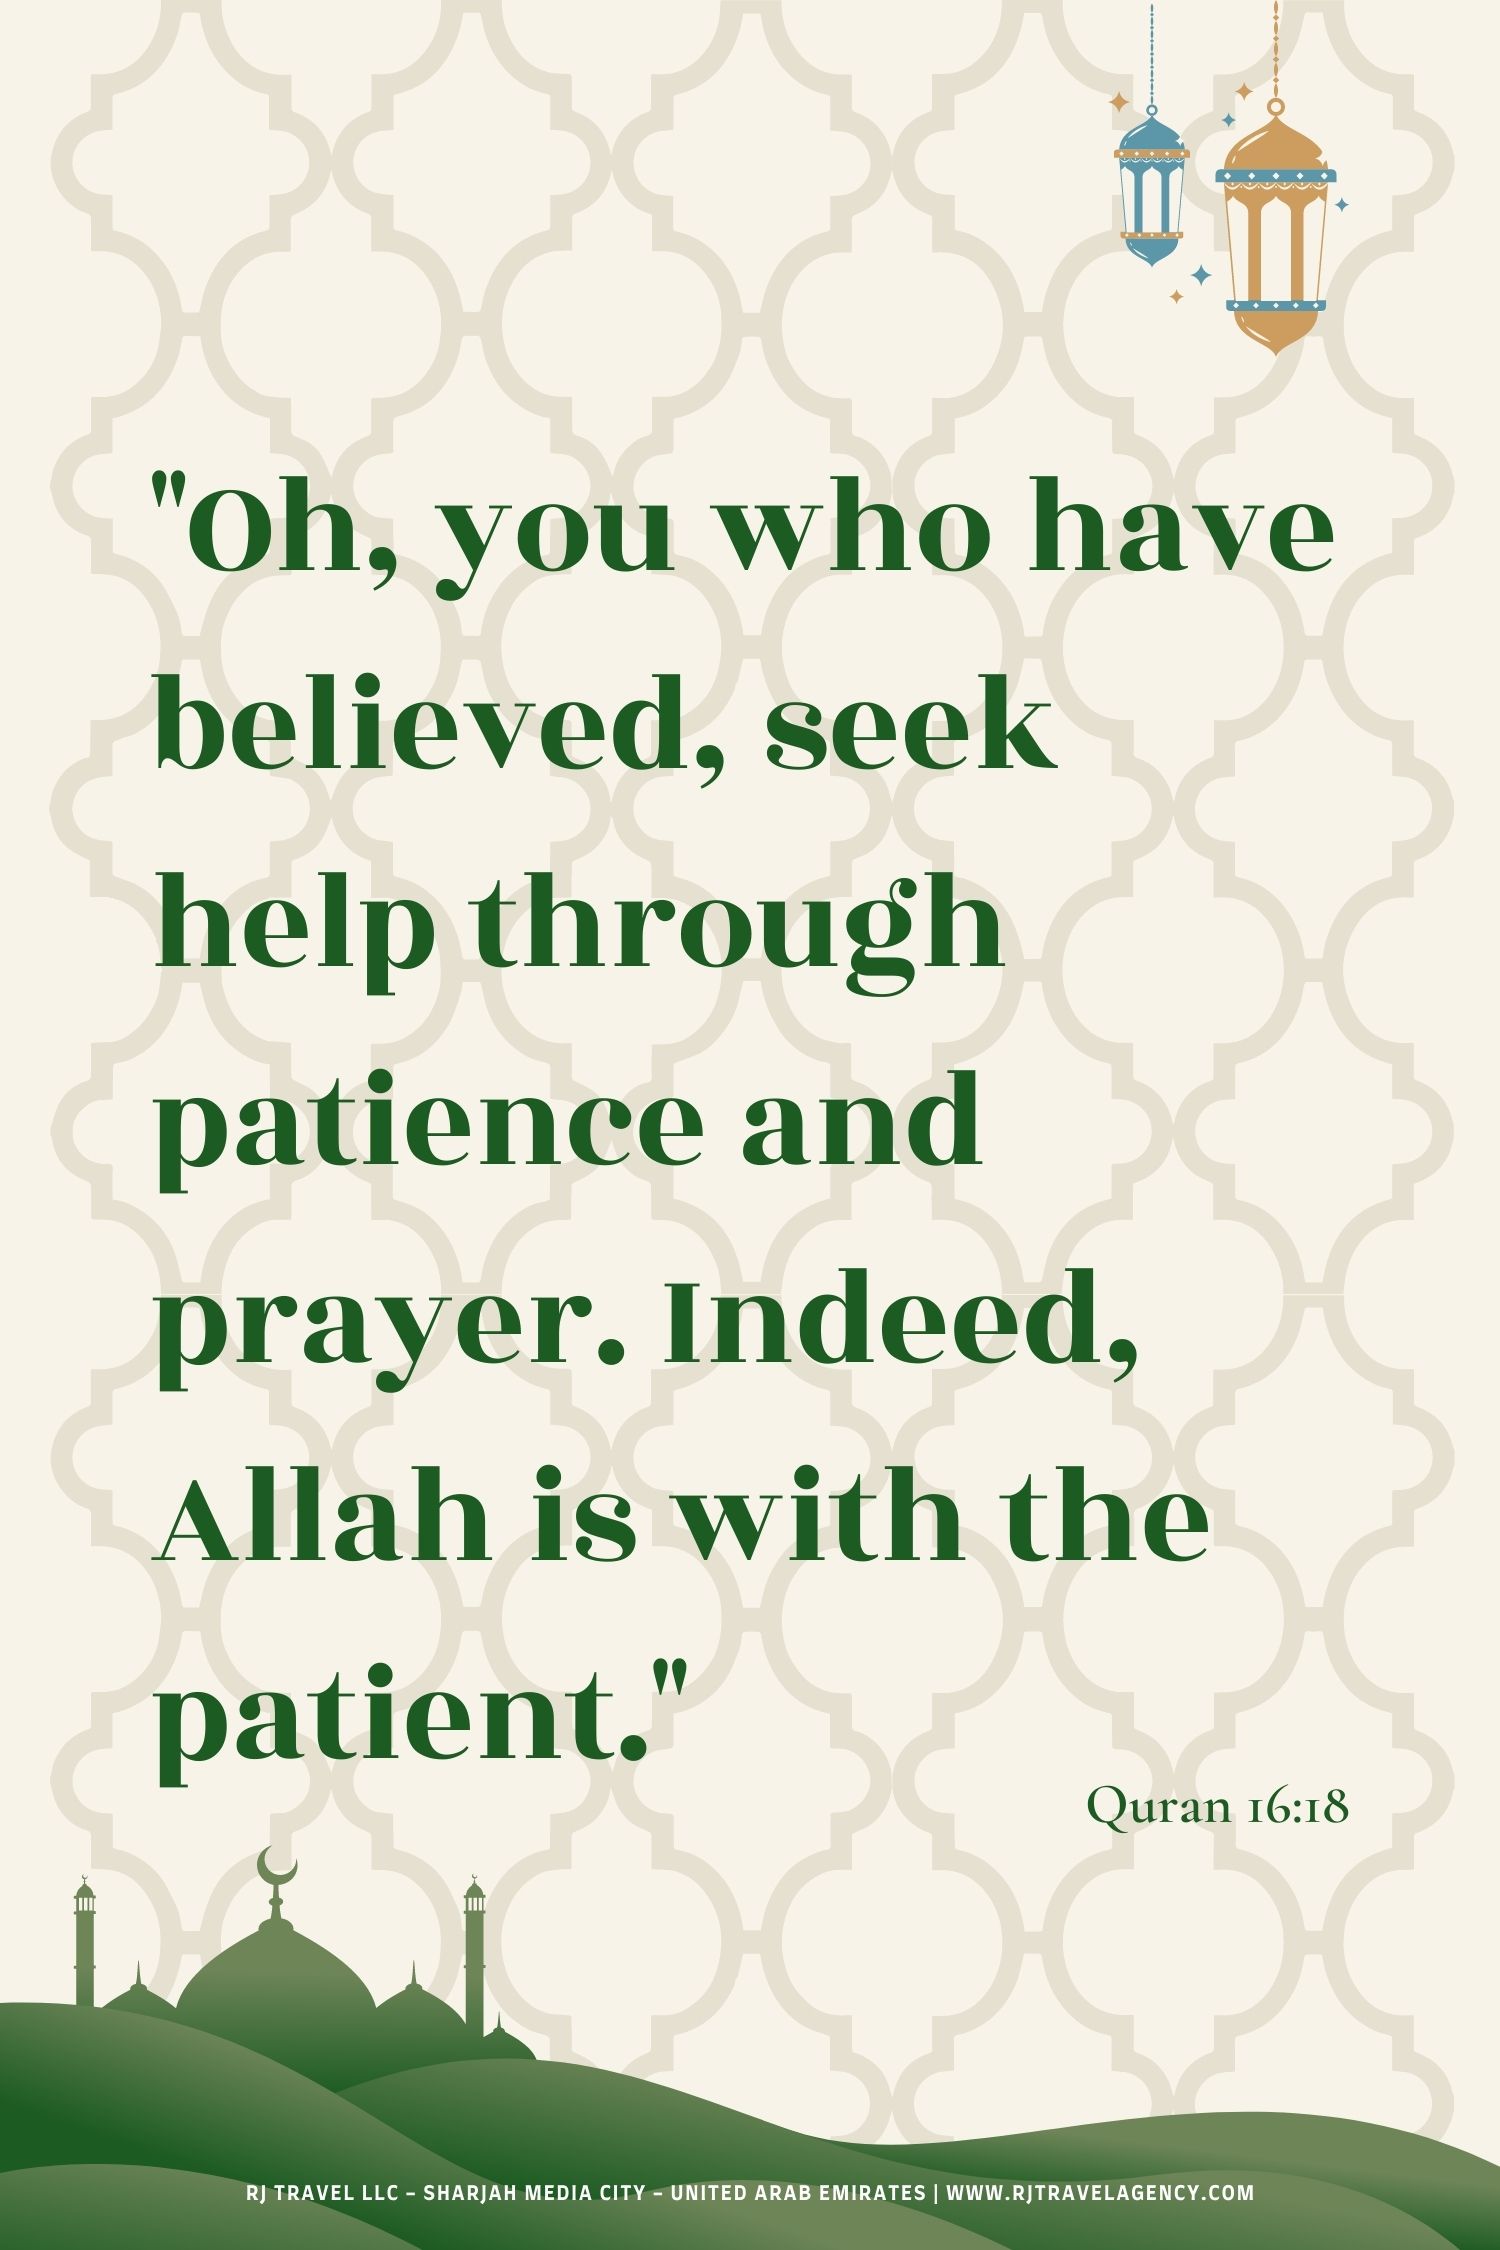 Quotes about patience in Islam